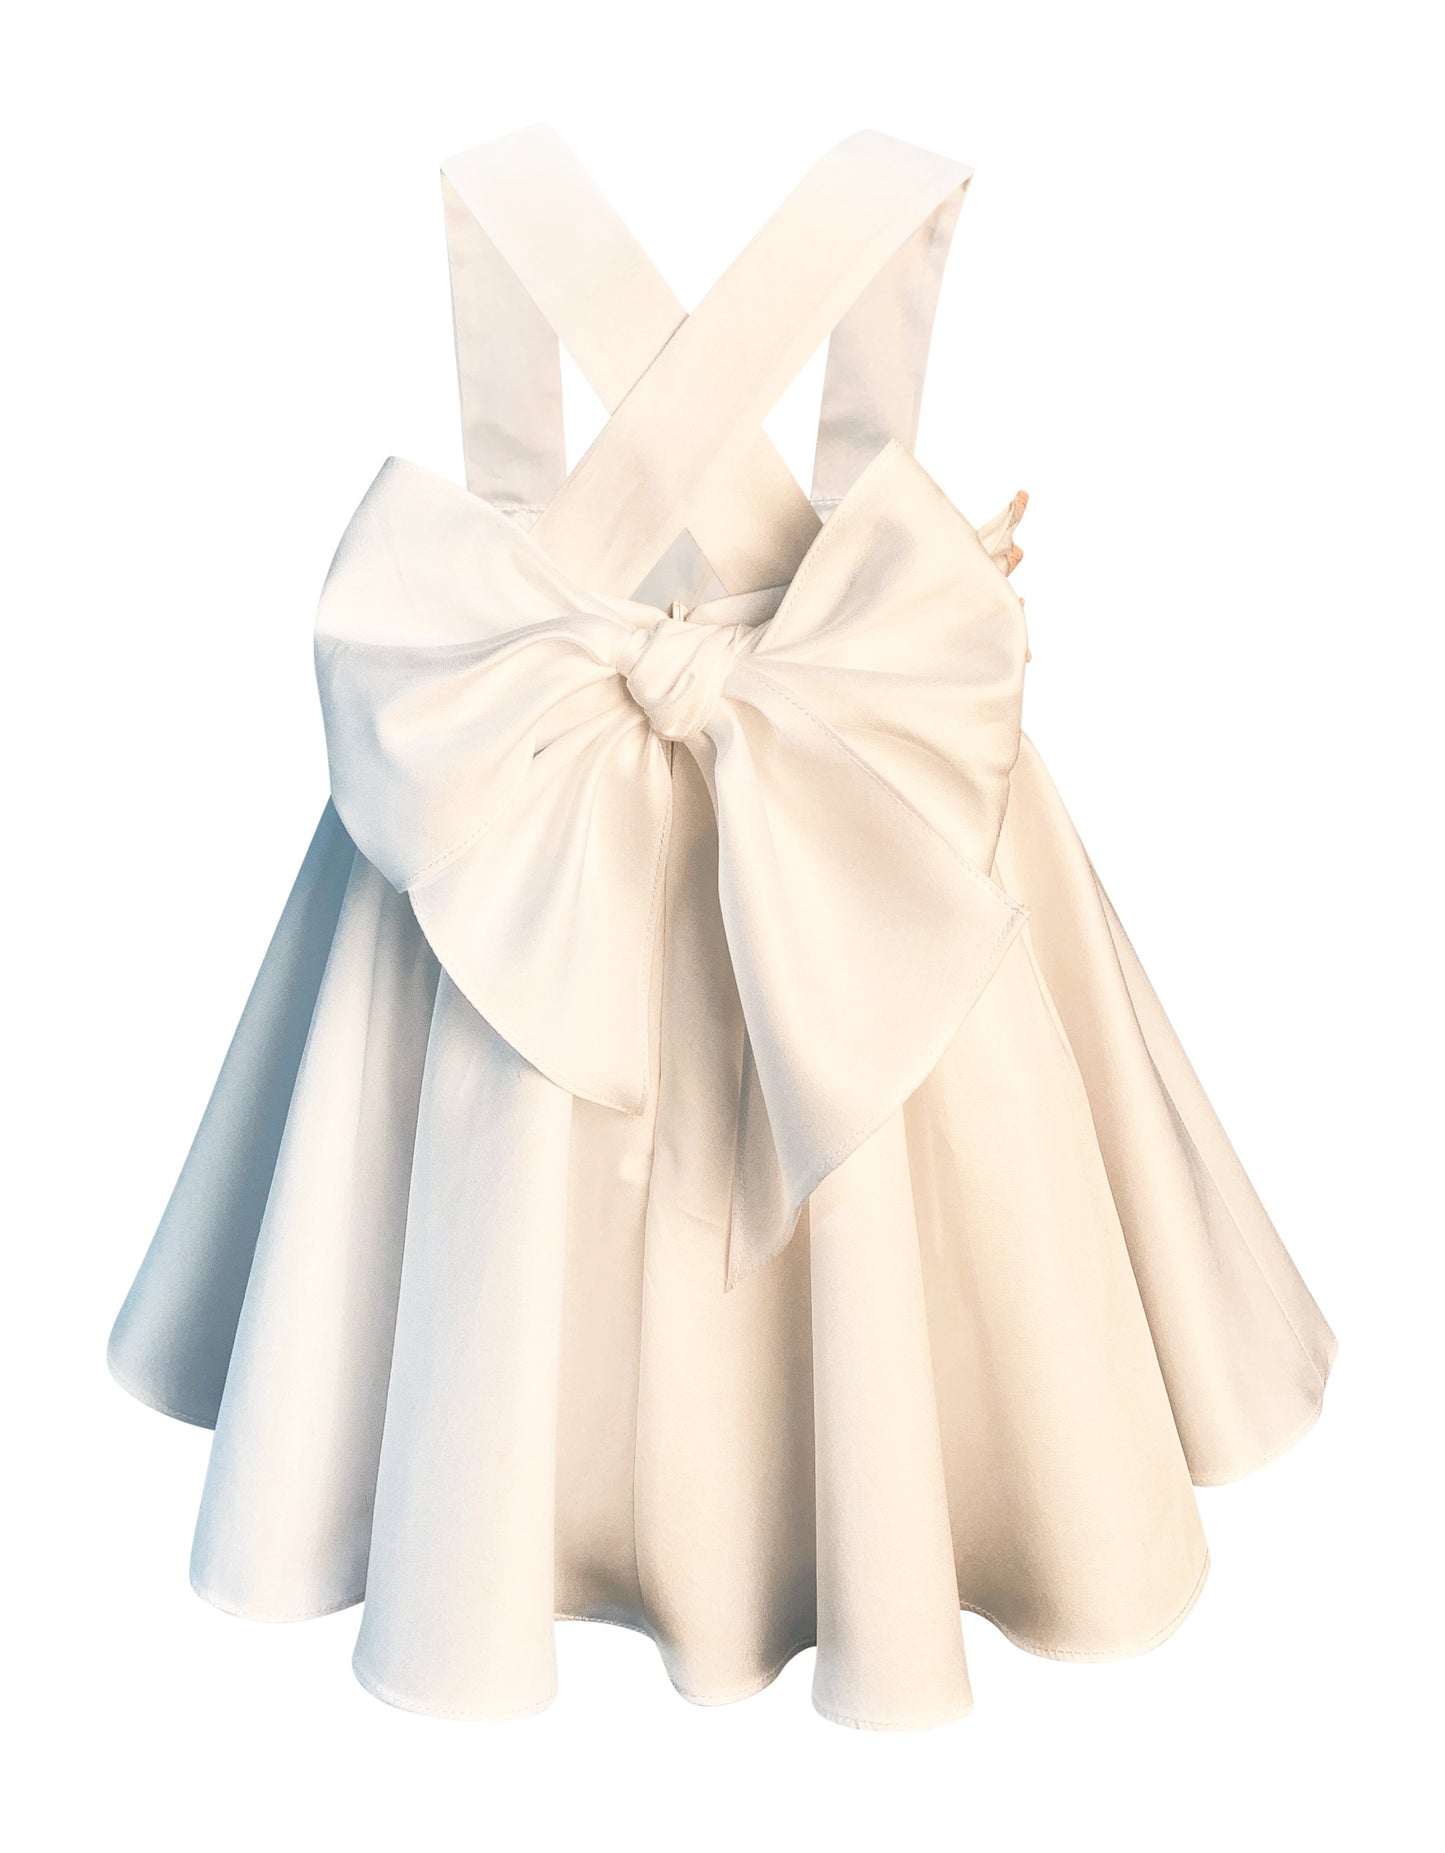 Helena and Harry Girl's White Sundress with Blush Pink Ruffles